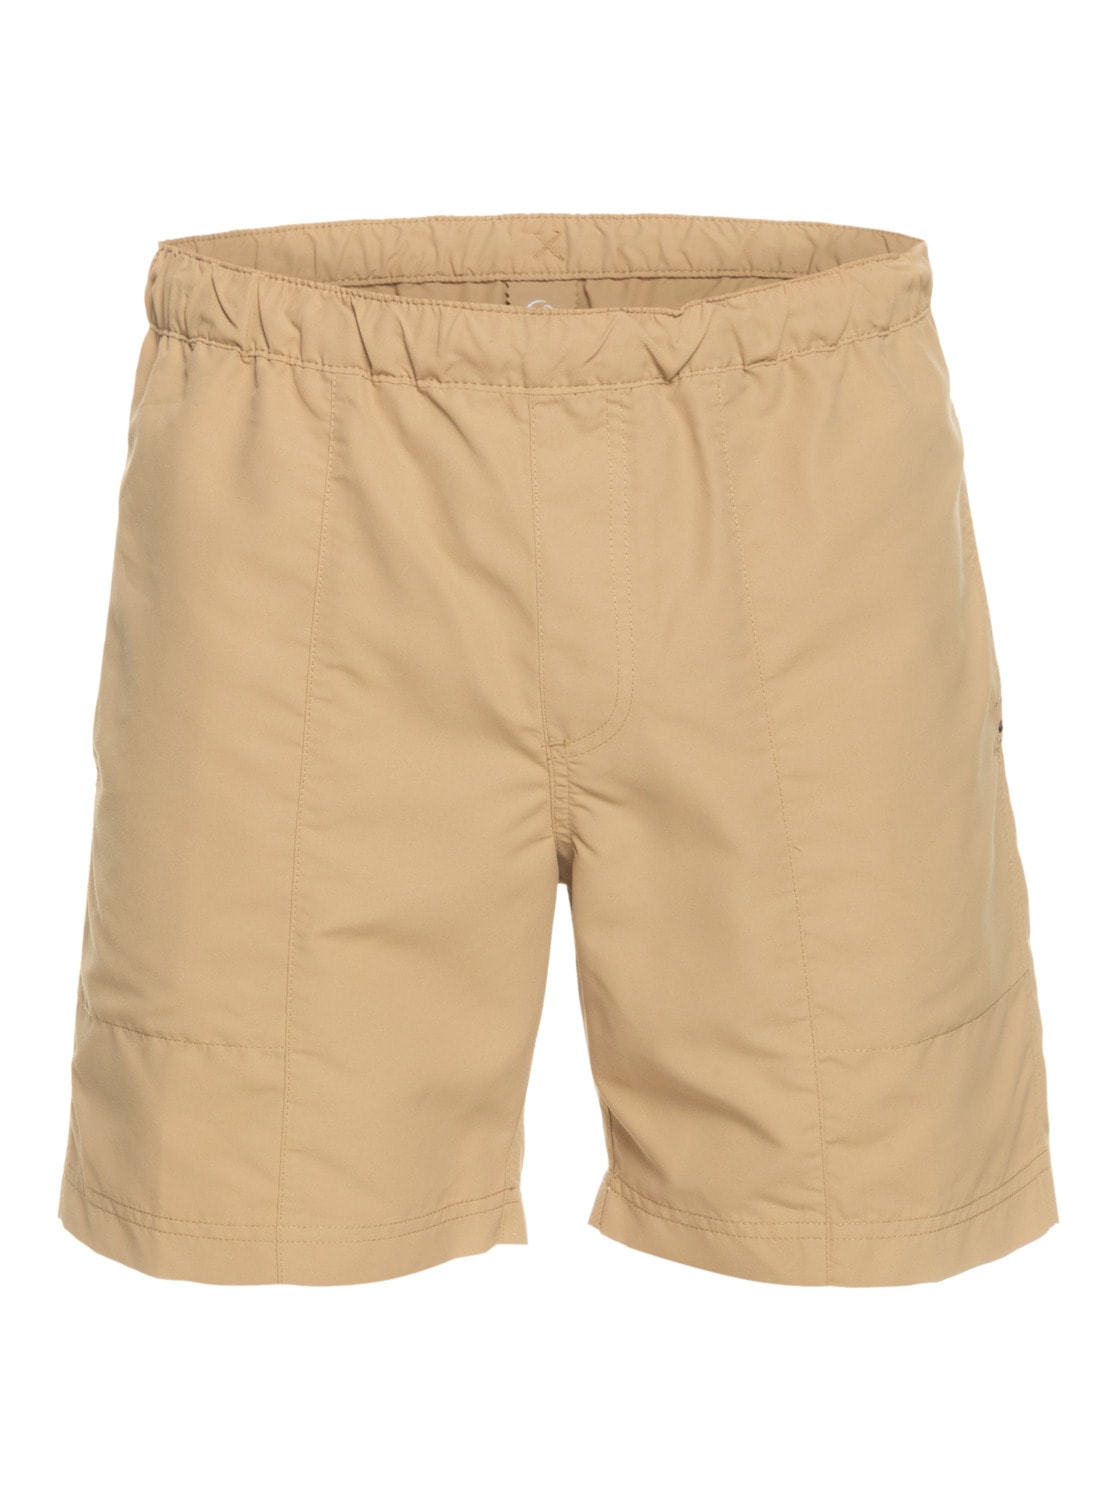 Quiksilver Funktionsshorts "Made Better 17""